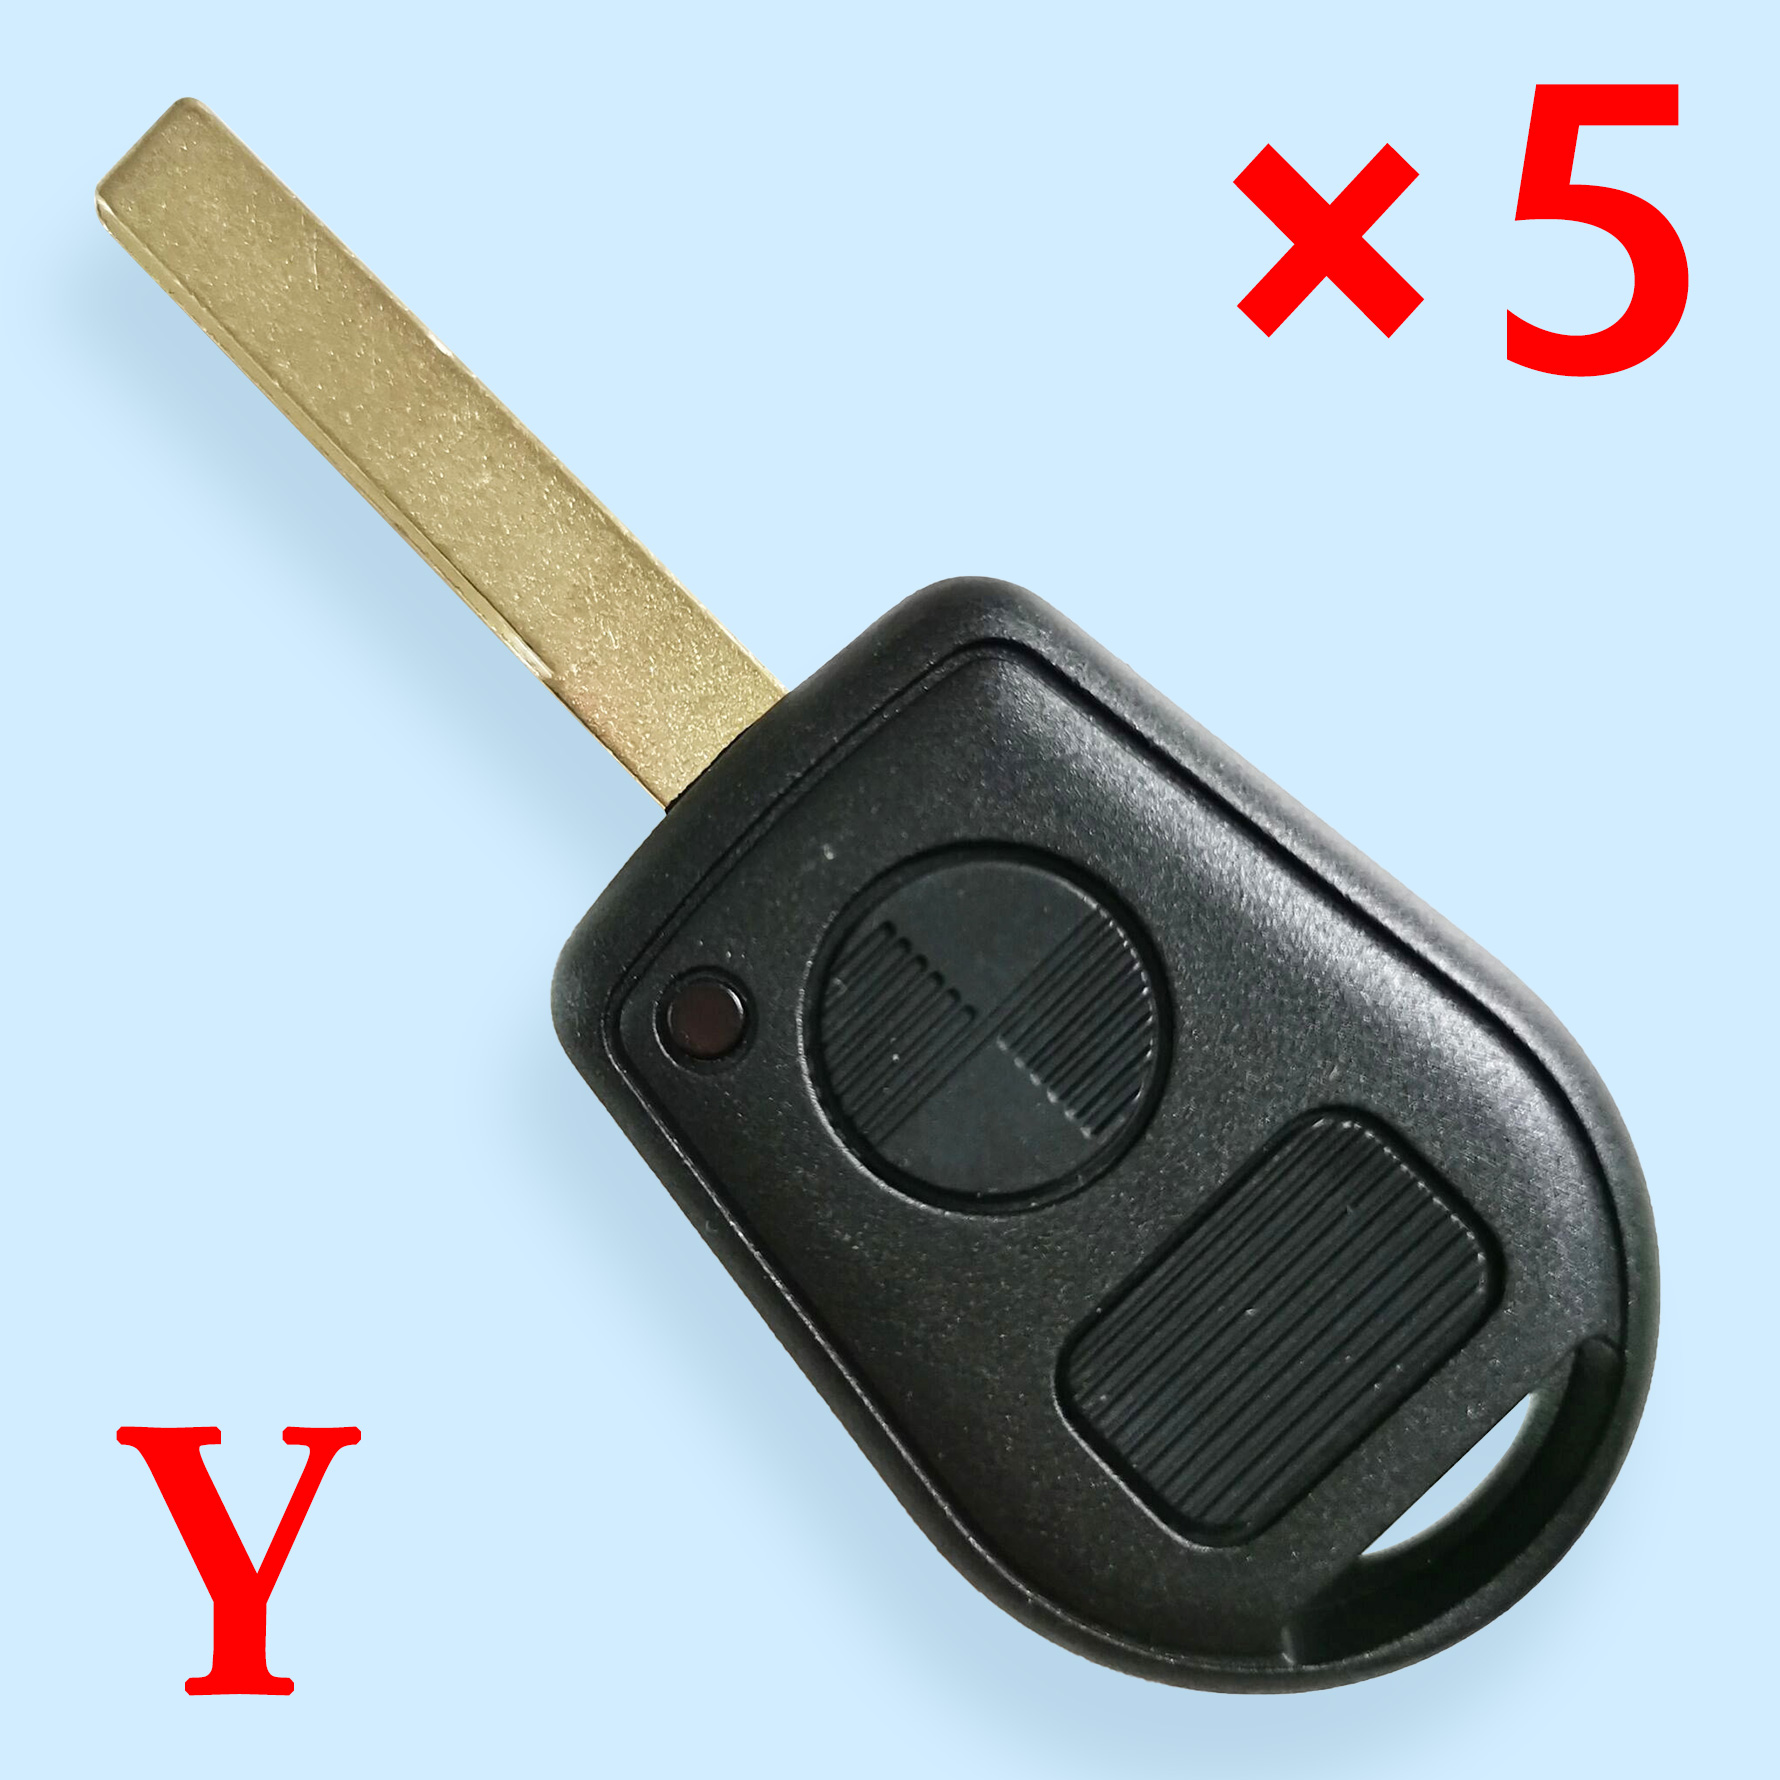 2 Buttons Key Shell with HU92 Blade for BMW - 5 pcs